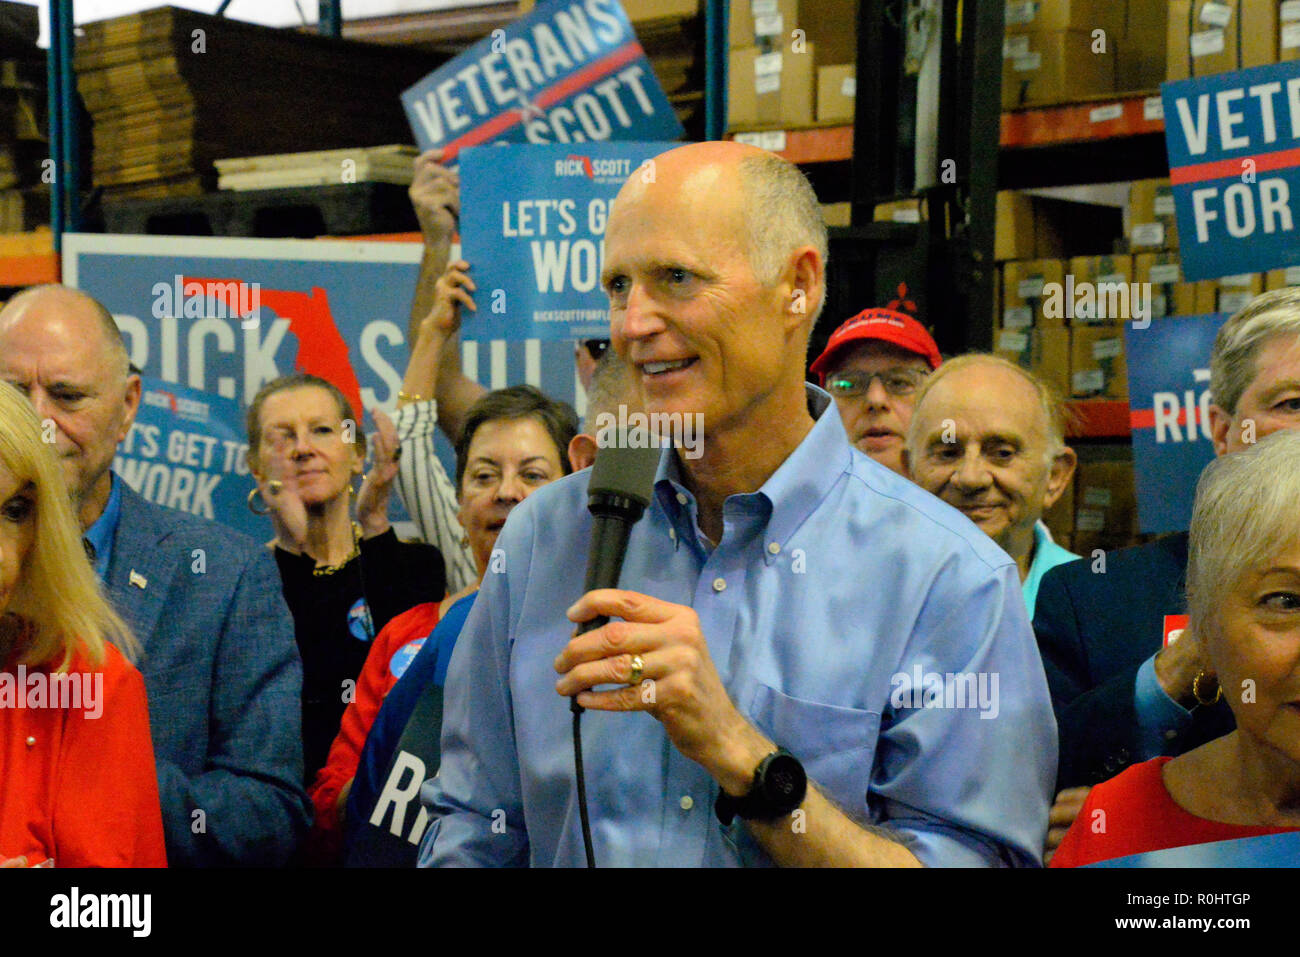 Melbourne, Florida USA. November 5, 2018 Nearing the end of his term as Florida’s Governor Rick Scott is now running for a US Senate seat. Scott made a campaign stop in Melbourne Florida at the Bansbach Easy Lift factory.  Bansbach Easylift® is the industry leader in motion system manufacturing.  Brevard County  City, County and State politicians attended one of Scott’s last campaign stops before Election Day. Photo Credit Julian Leek / Alamy Live News Stock Photo